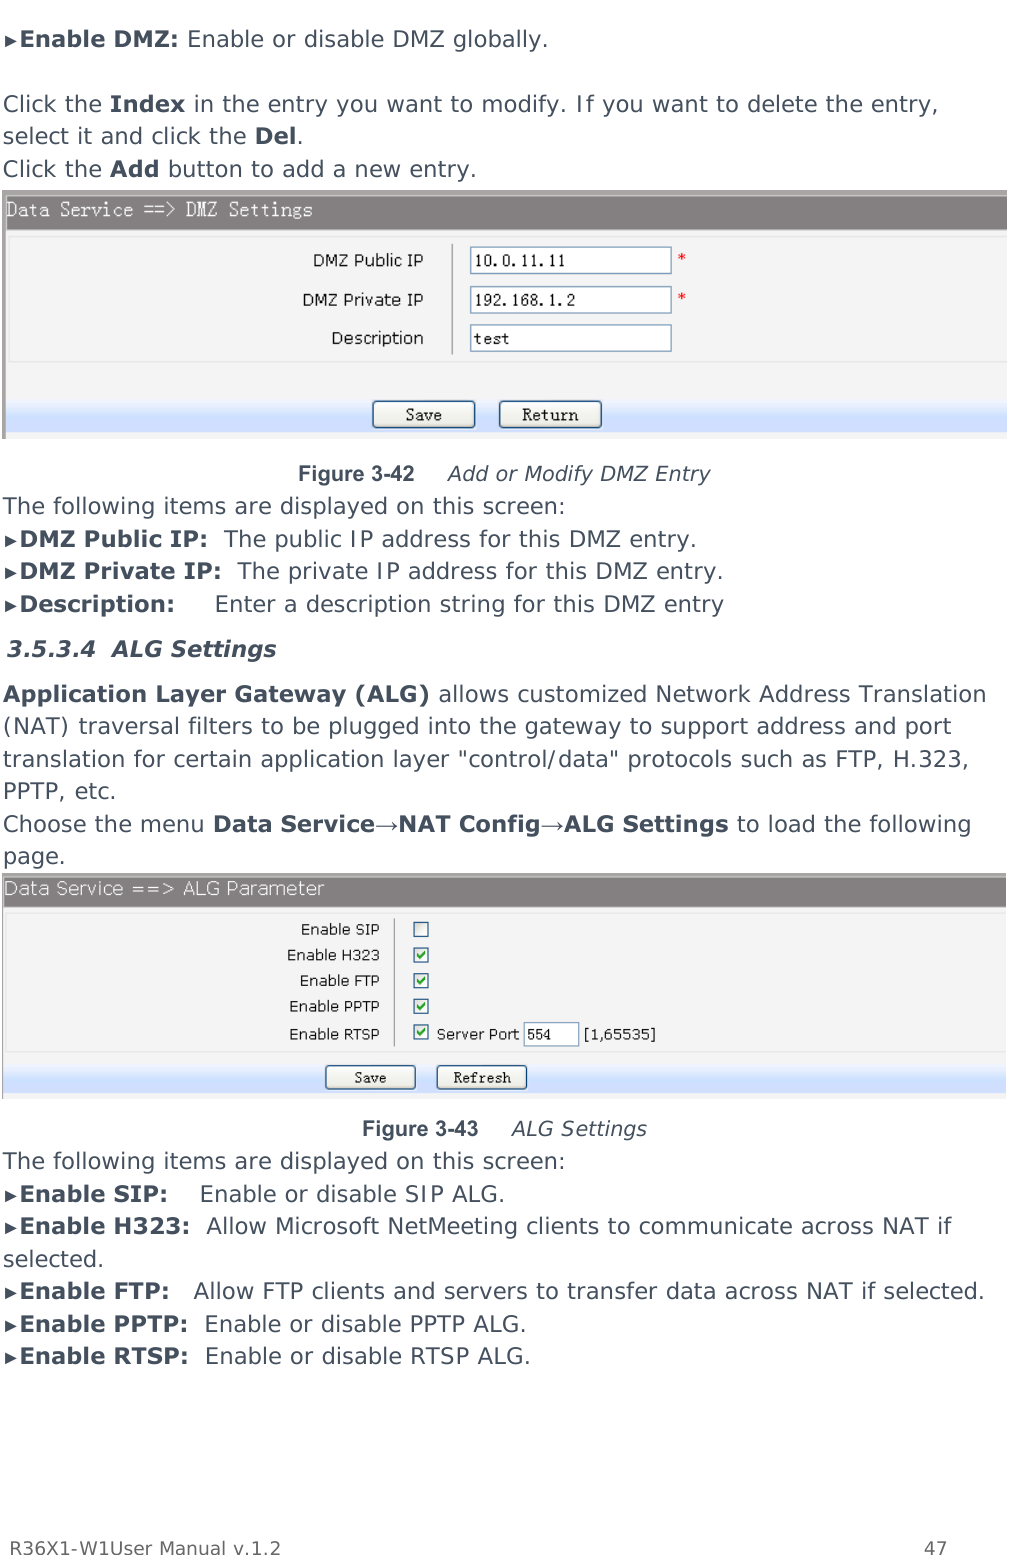           R36X1-W1User Manual v.1.2    47  ►Enable DMZ: Enable or disable DMZ globally.  Click the Index in the entry you want to modify. If you want to delete the entry, select it and click the Del. Click the Add button to add a new entry.  Figure 3-42  Add or Modify DMZ Entry The following items are displayed on this screen: ►DMZ Public IP:  The public IP address for this DMZ entry. ►DMZ Private IP:  The private IP address for this DMZ entry. ►Description:     Enter a description string for this DMZ entry 3.5.3.4 ALG Settings Application Layer Gateway (ALG) allows customized Network Address Translation (NAT) traversal filters to be plugged into the gateway to support address and port translation for certain application layer &quot;control/data&quot; protocols such as FTP, H.323, PPTP, etc. Choose the menu Data Service→NAT Config→ALG Settings to load the following page.  Figure 3-43  ALG Settings The following items are displayed on this screen: ►Enable SIP:    Enable or disable SIP ALG. ►Enable H323:  Allow Microsoft NetMeeting clients to communicate across NAT if selected. ►Enable FTP:   Allow FTP clients and servers to transfer data across NAT if selected. ►Enable PPTP:  Enable or disable PPTP ALG. ►Enable RTSP:  Enable or disable RTSP ALG. 